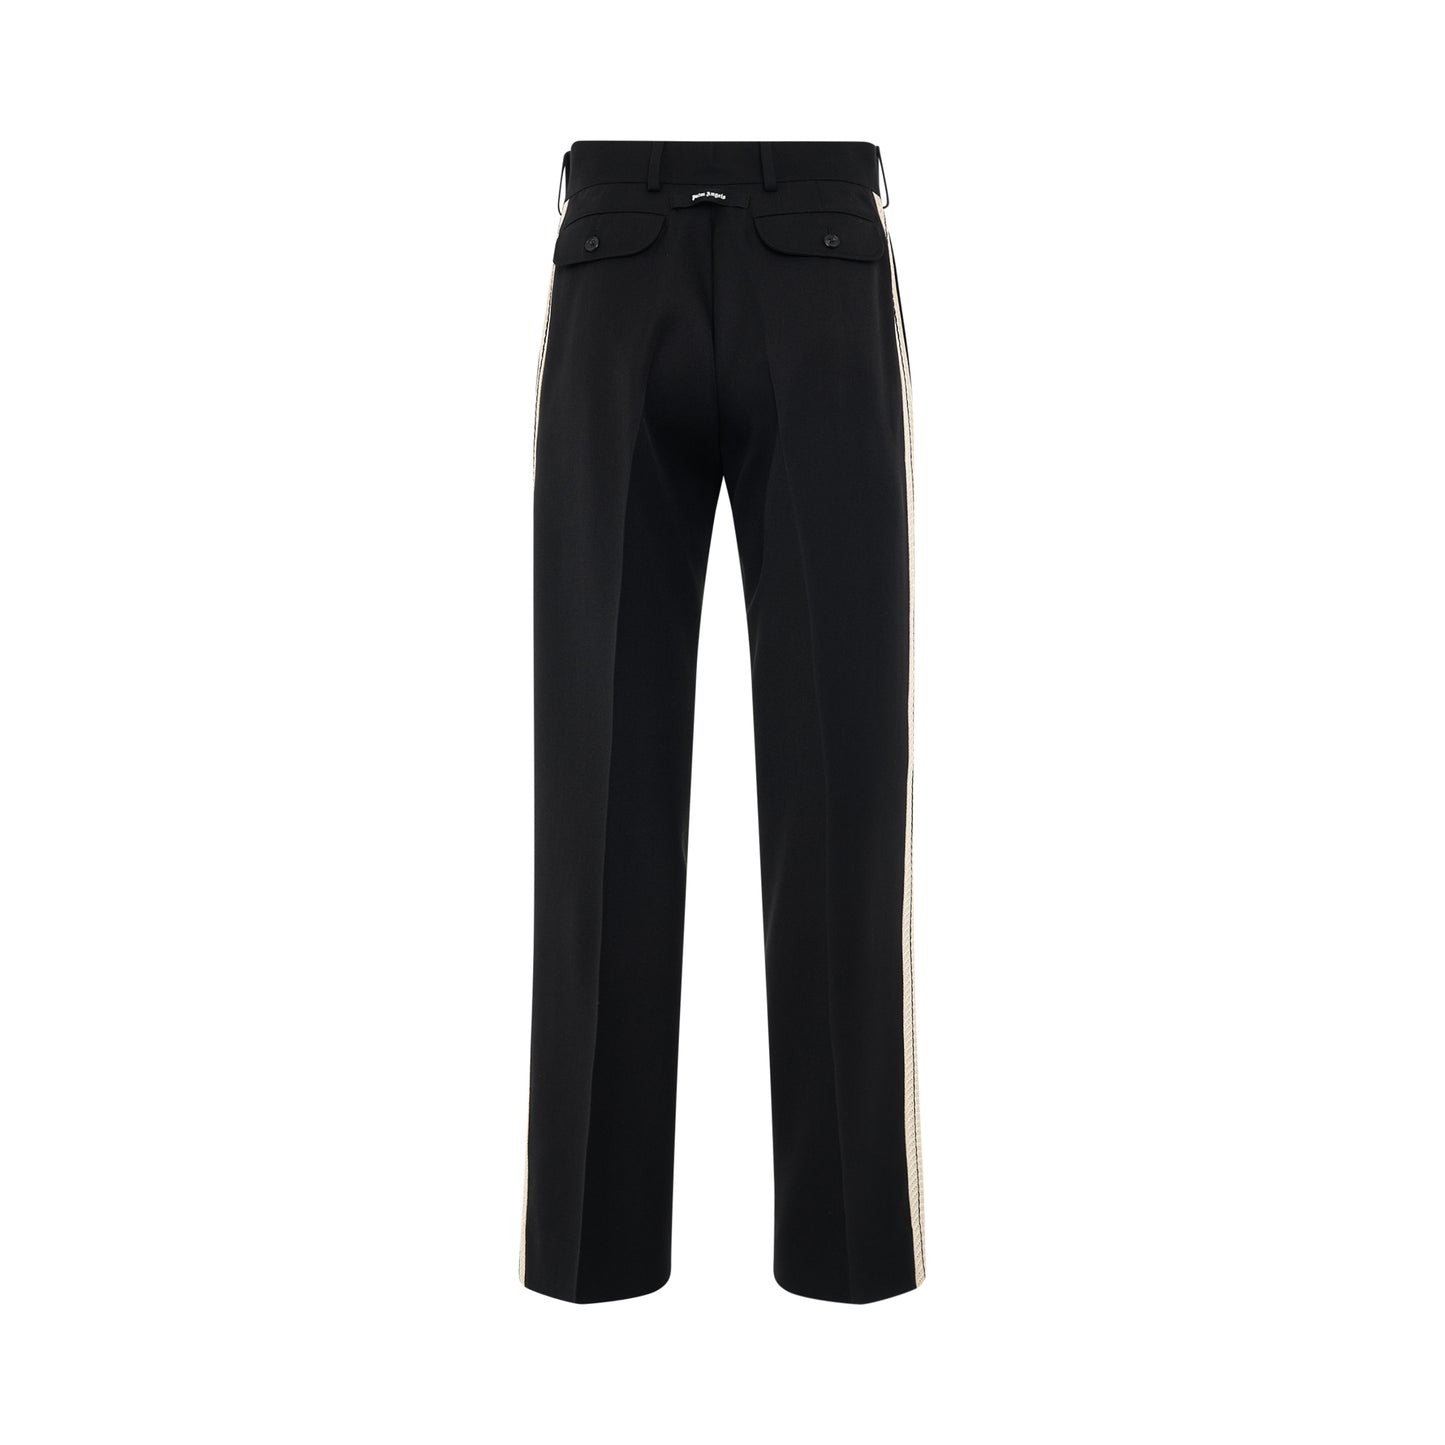 Knit Tape Suit Pants in Black/Off White